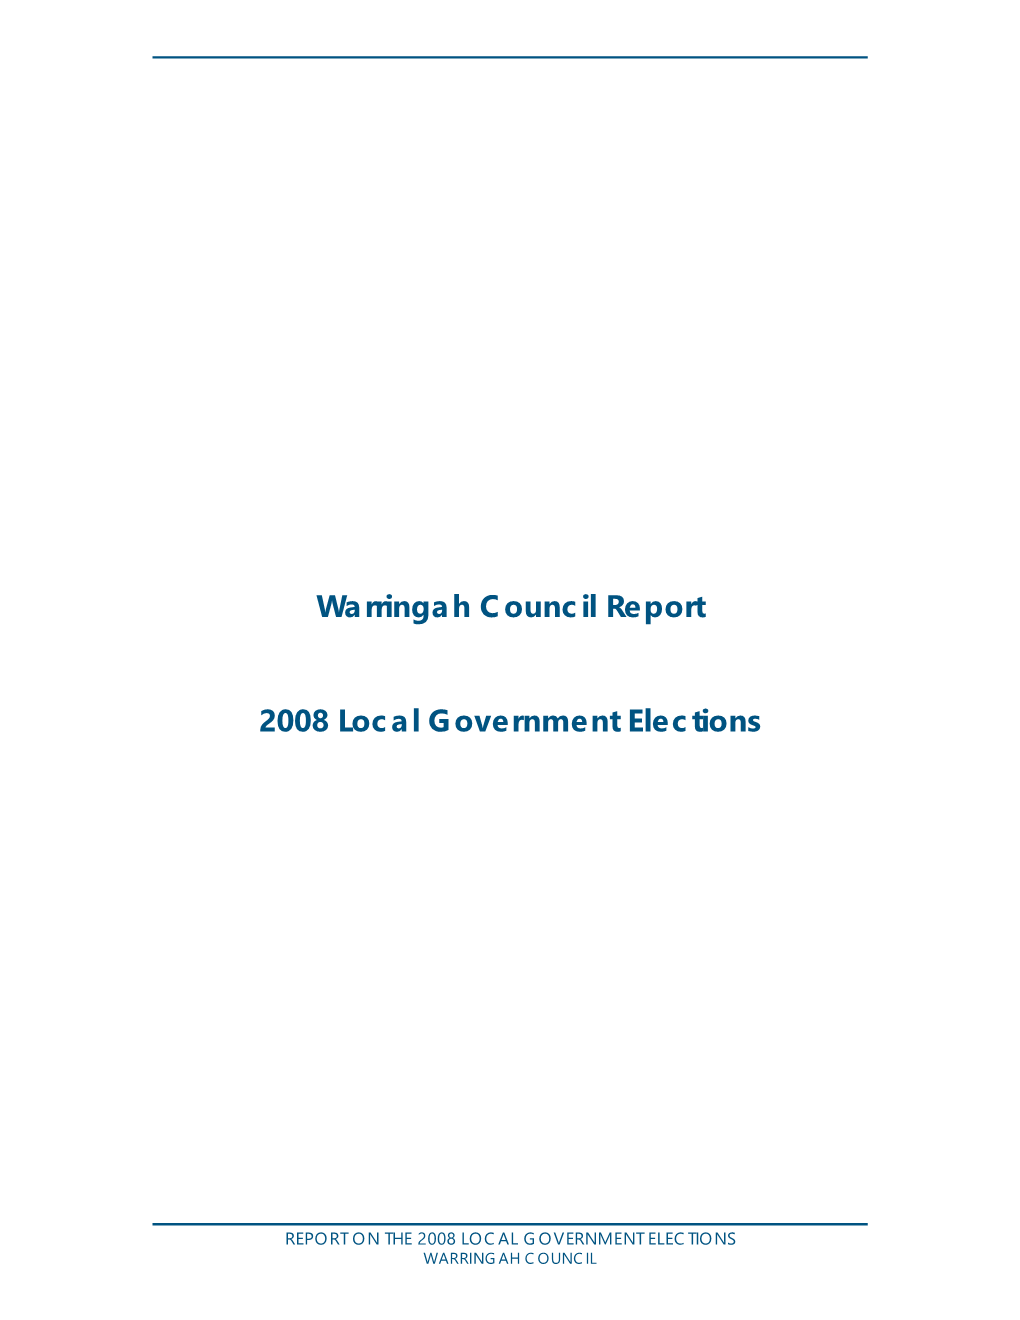 Warringah Council Report 2008 Local Government Elections